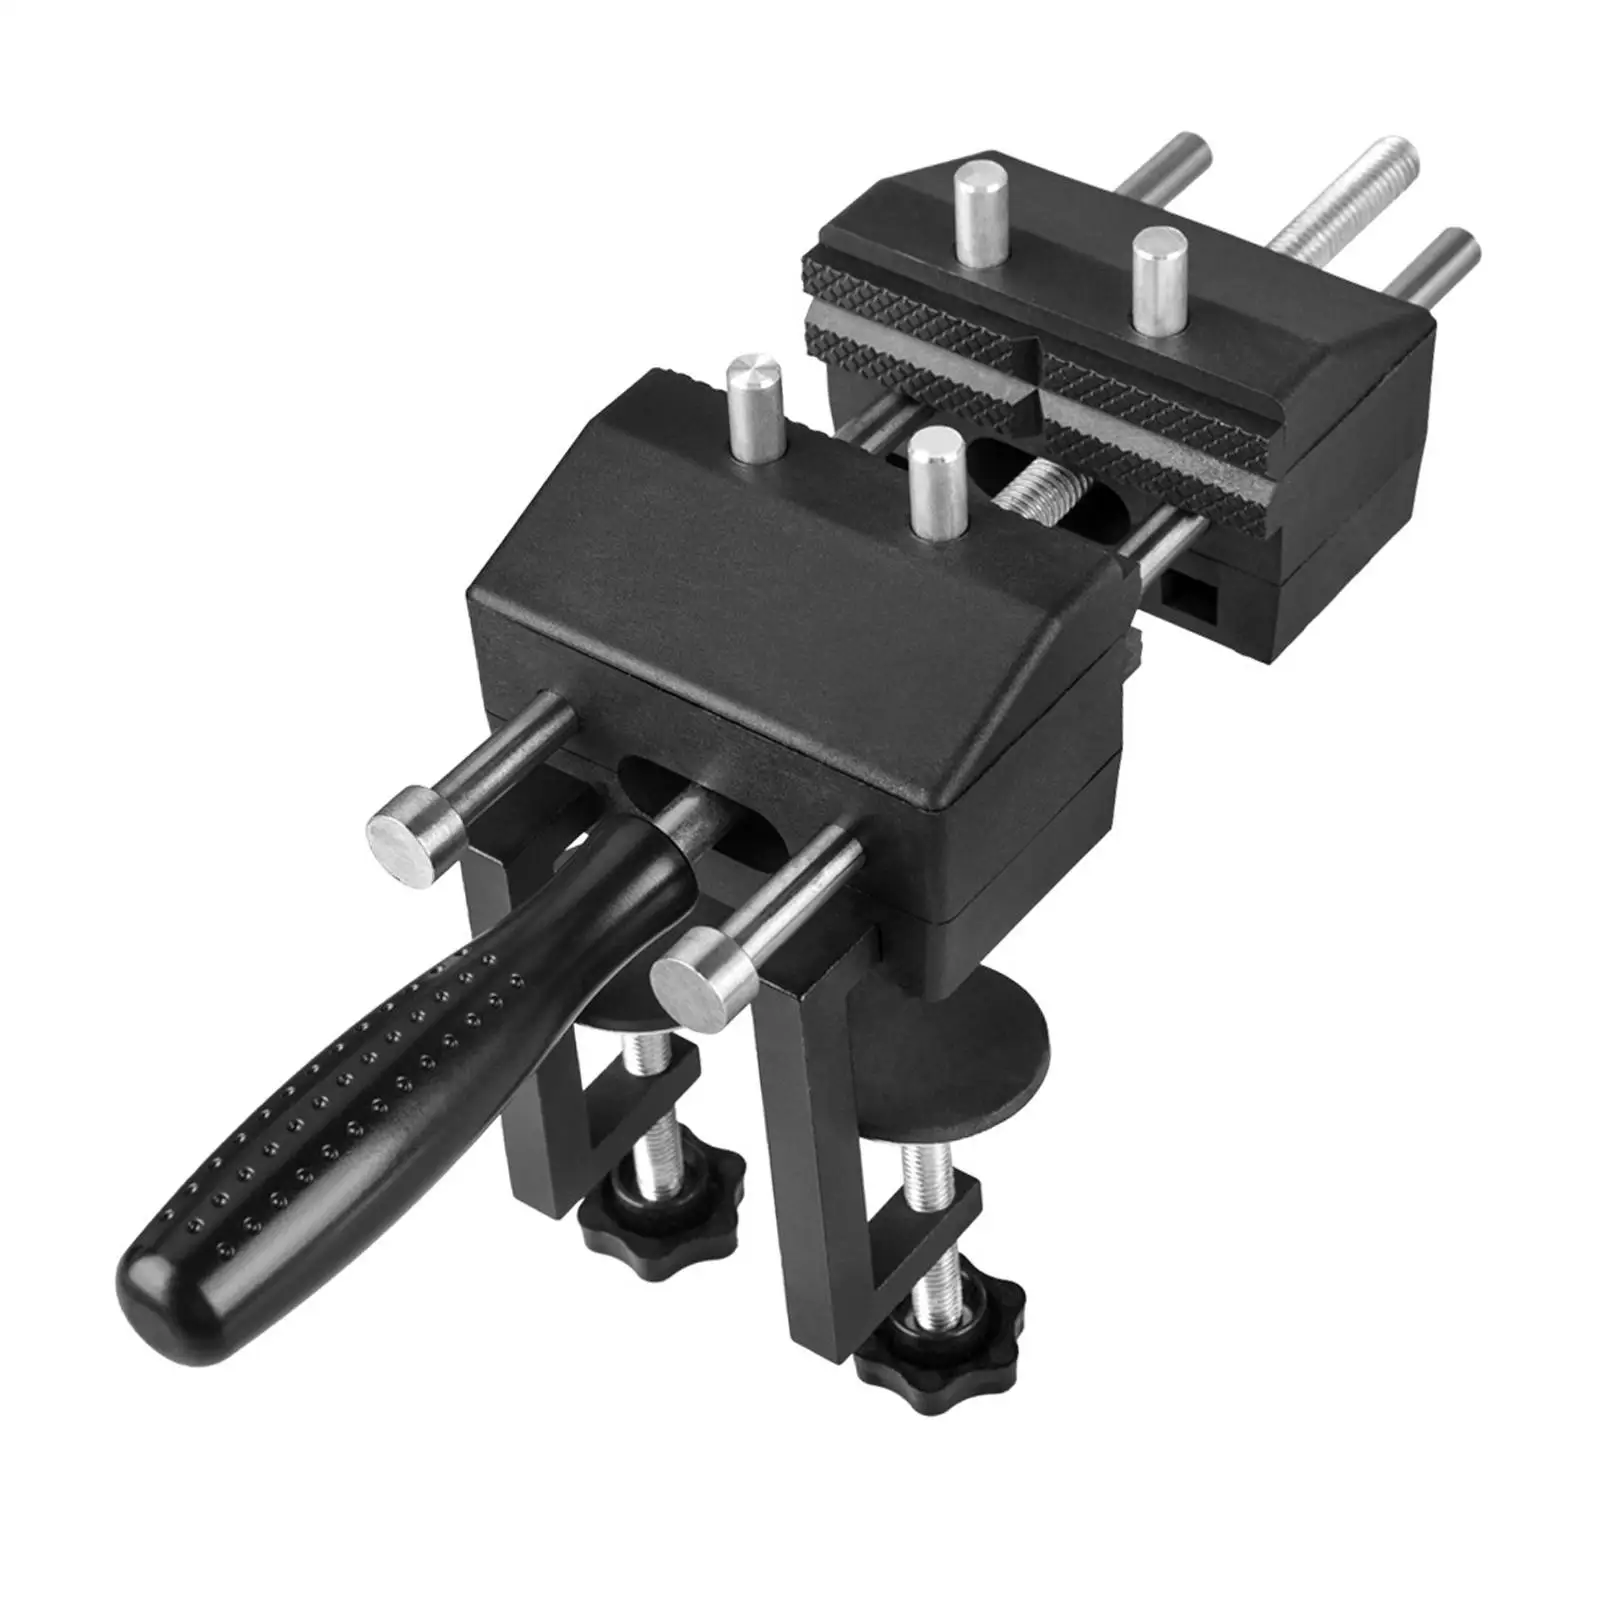 Bench Vise Clamp Adjustable with Swivel Base Table Vice Clamp for Woodworking Handcraft Creations Household Hobby Drilling